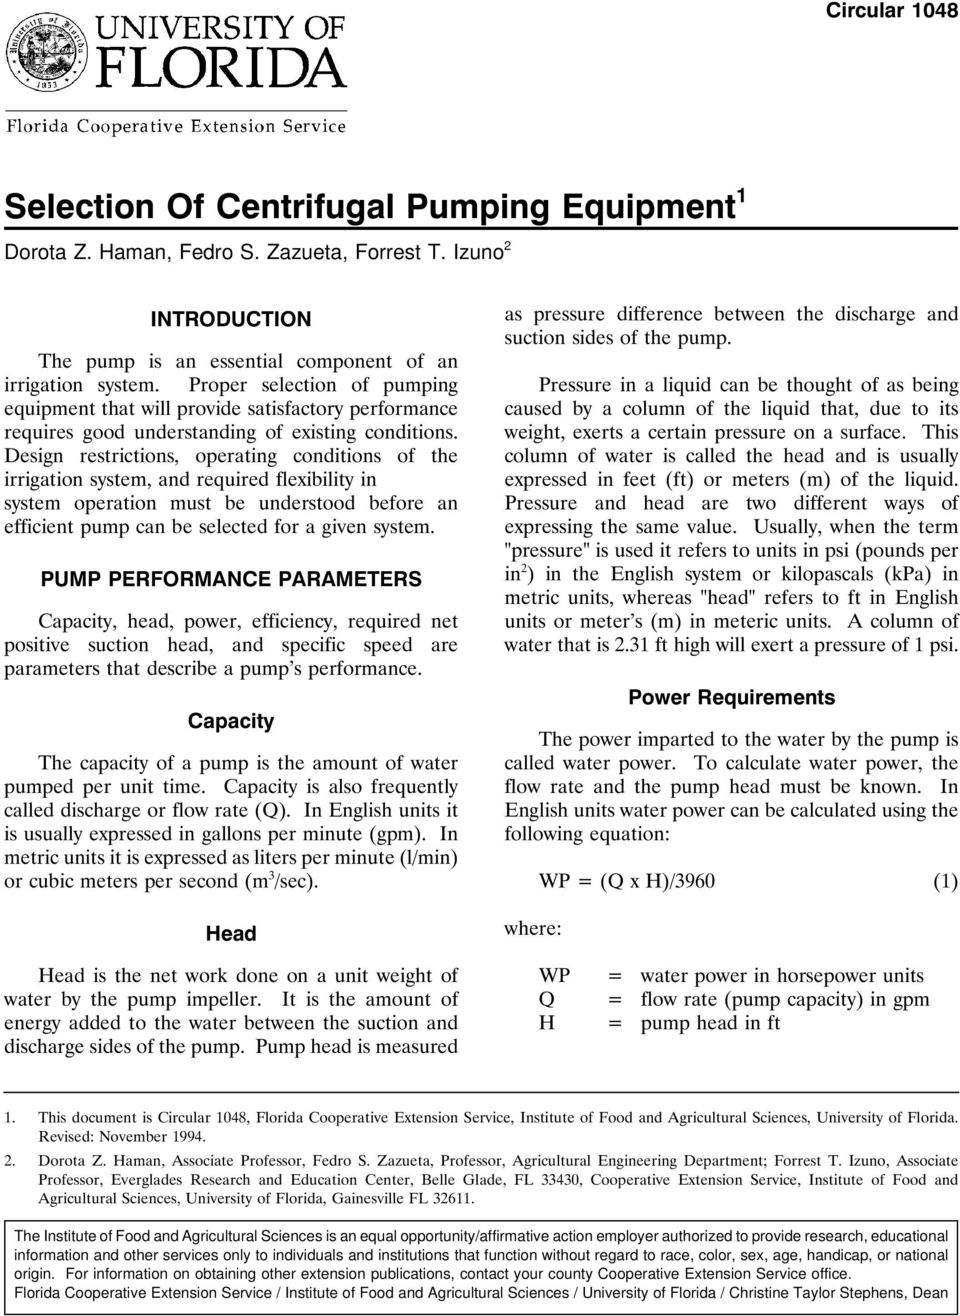 Design restrictions, operating conditions of the irrigation system, and required flexibility in system operation must be understood before an efficient pump can be selected for a given system.